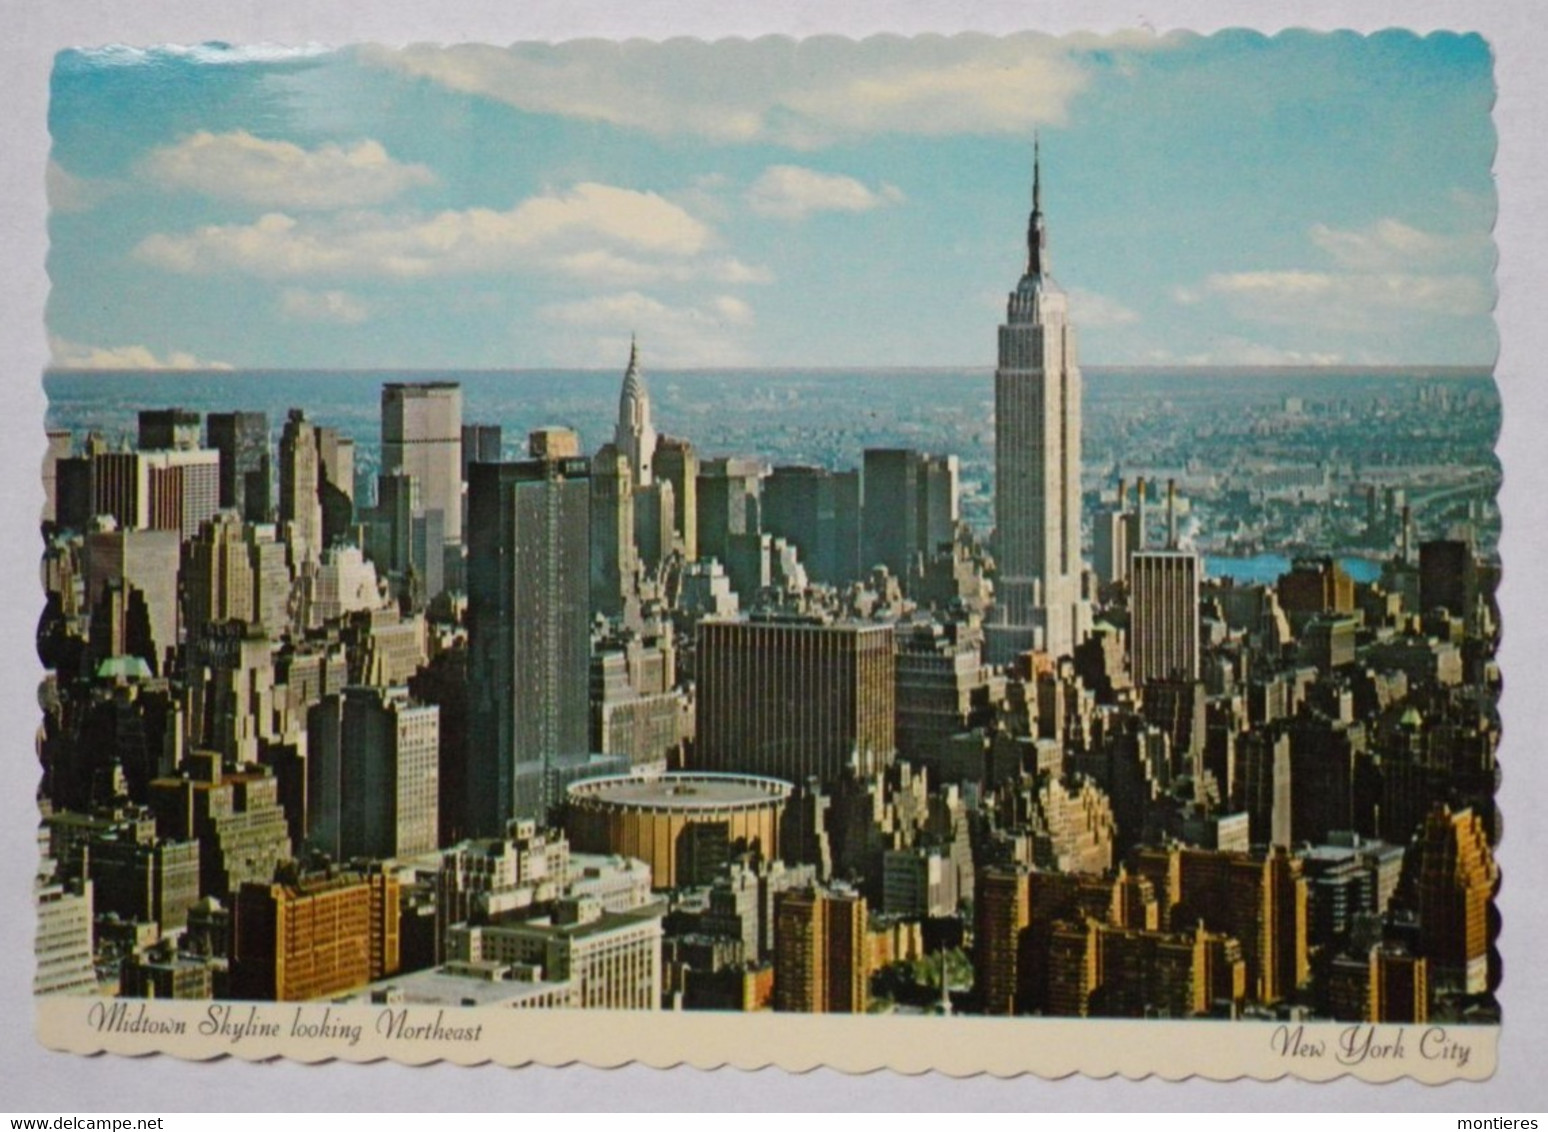 CPSM MIDTOWN SKYLINE LOOKING NOTHEAST - EMPIRE STATE BUILDING - MANHATTAN POST CARD PUB - Panoramic Views